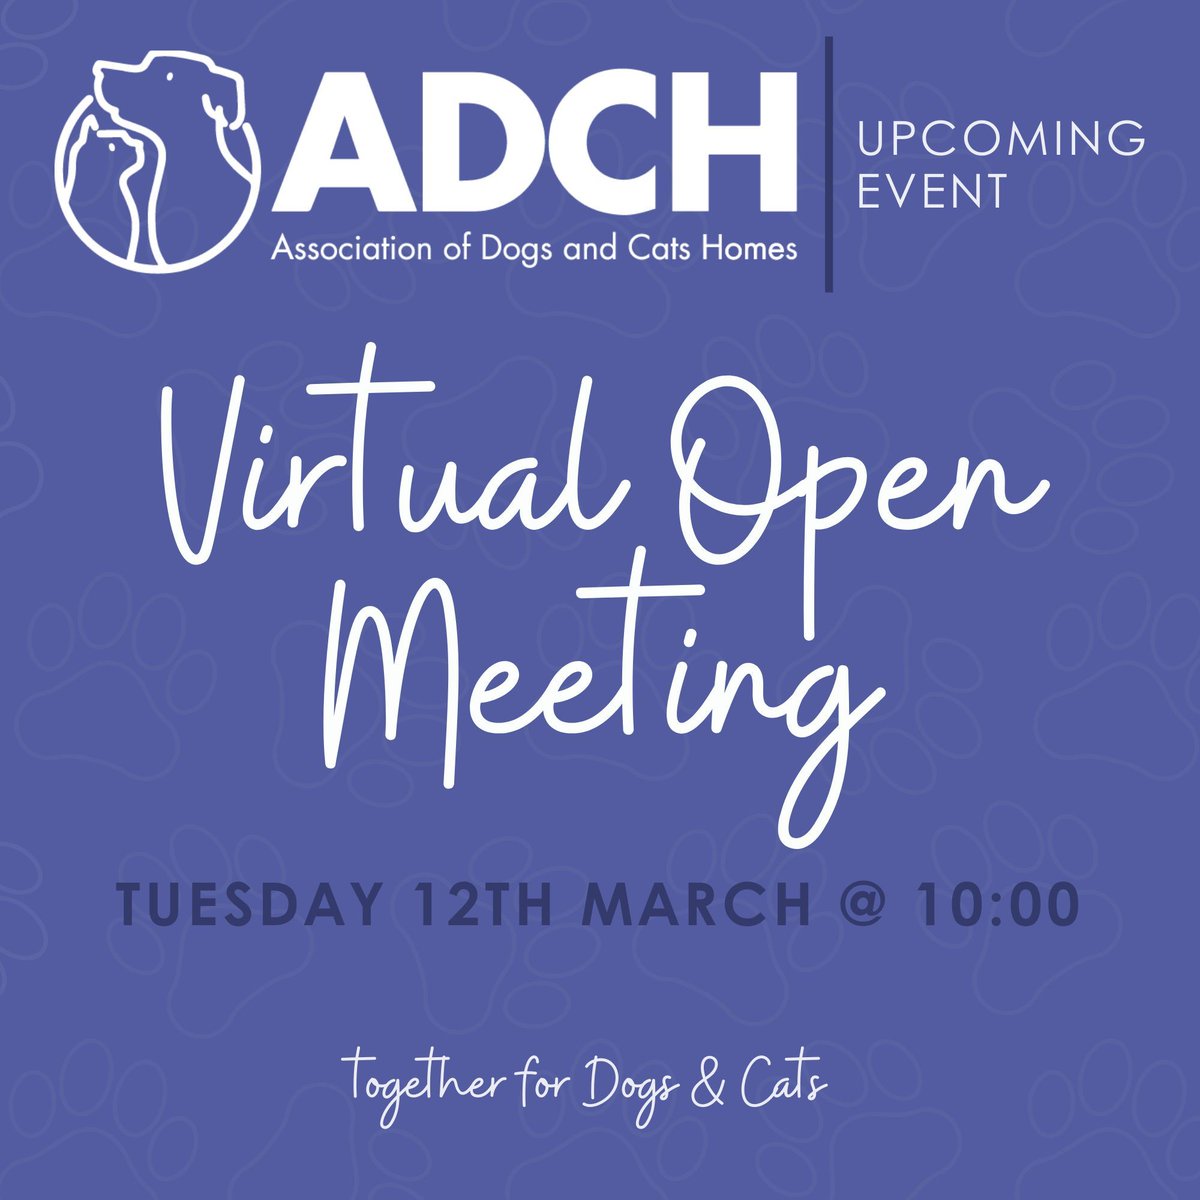 ADCH Members📢 Join ADCH next Tuesday for our virtual Open Meeting!🎇 You can expect an overview of our plans for 2024, an update from our Legislative Committee and two interesting sessions! You can view the full programme and register here ➡ buff.ly/3Ts2yZW